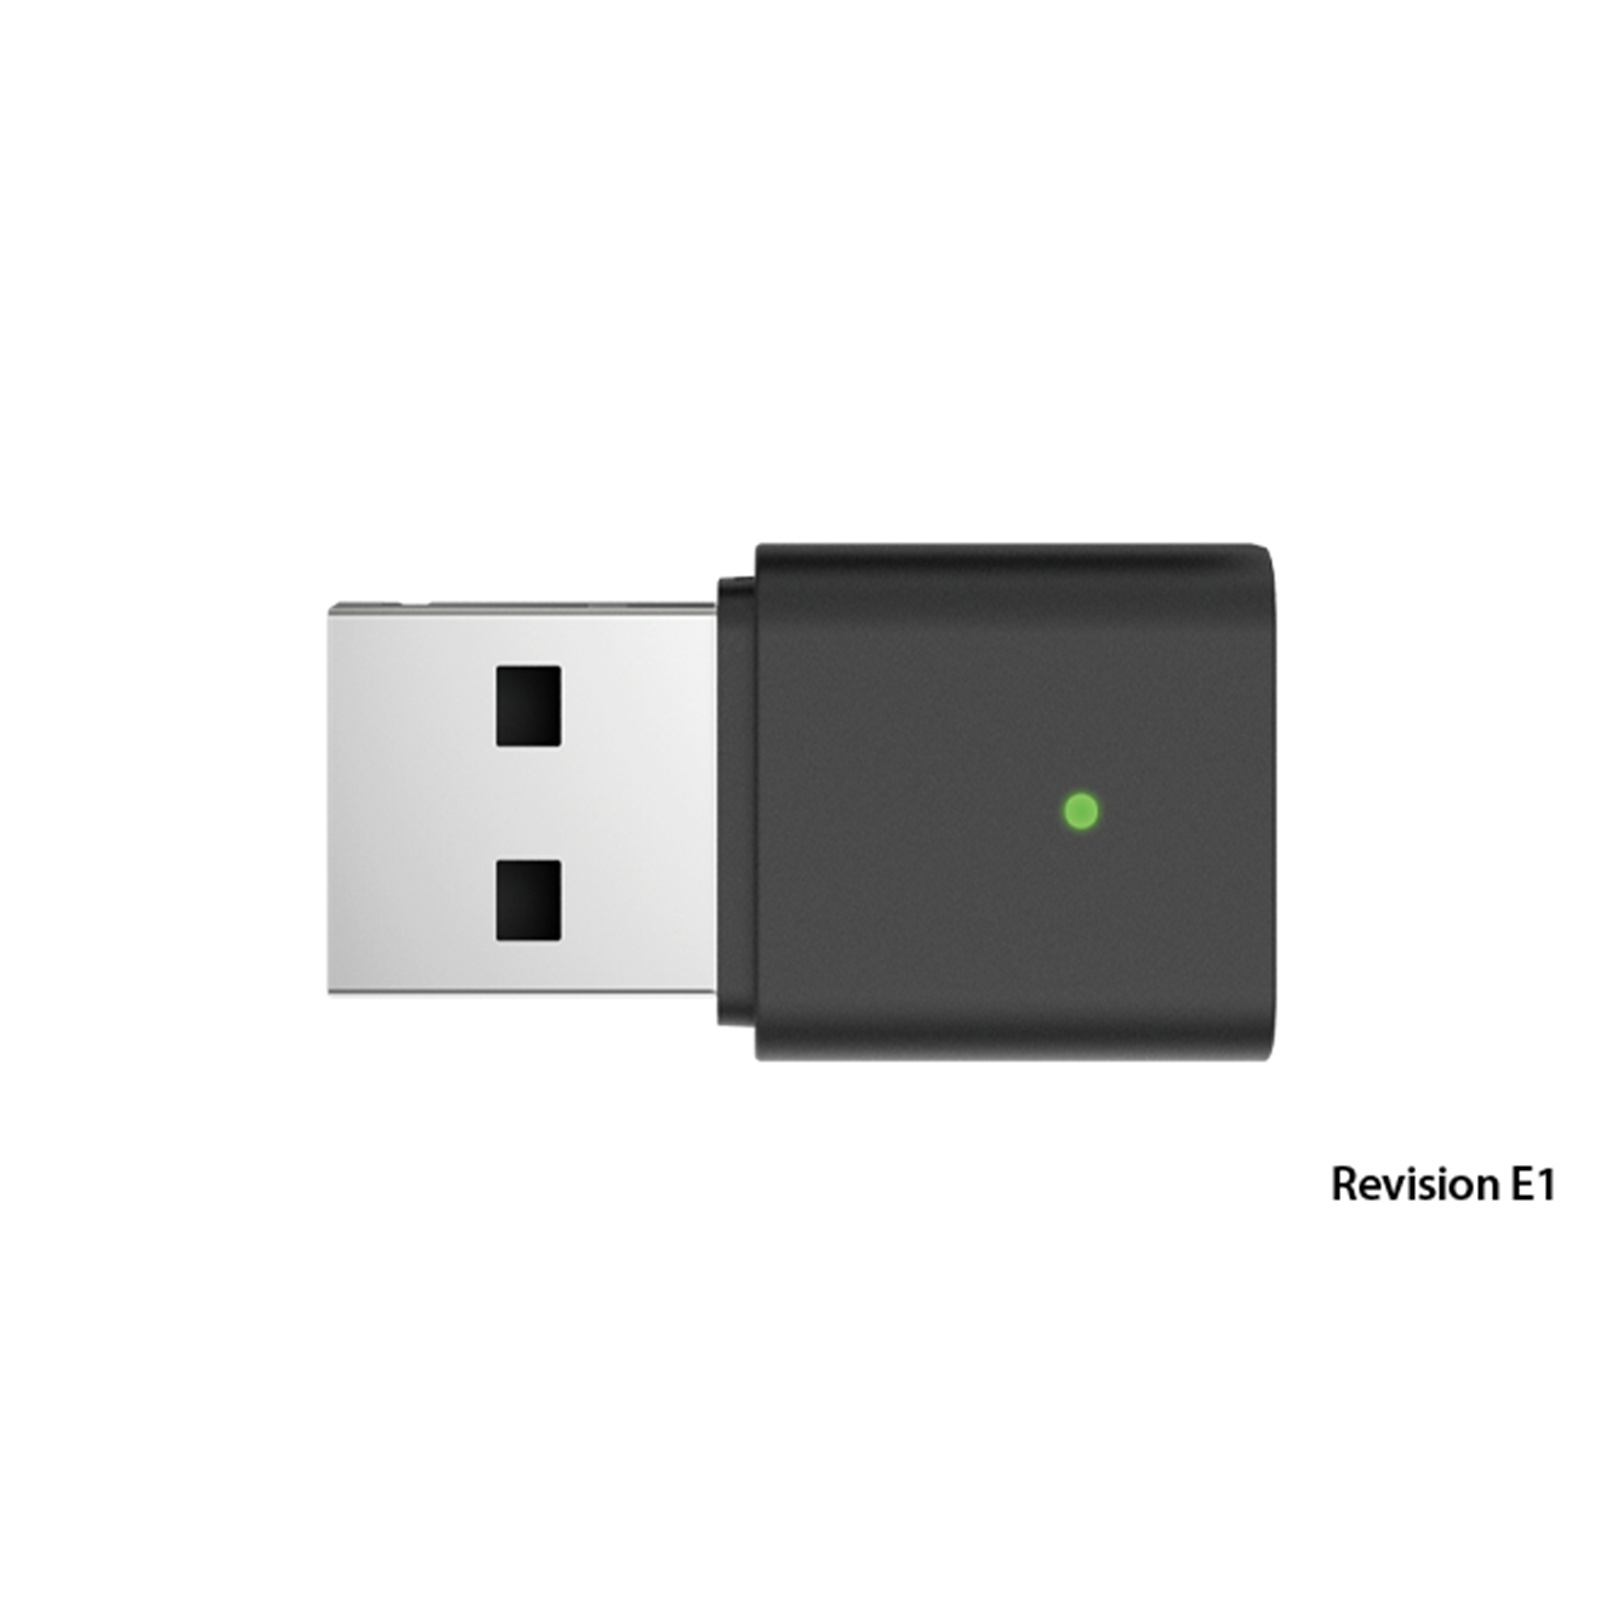 Buy the D-Link DWA-131 N300 Nano USB Wireless Adapter (Support Win10 & Mac  OS... ( DWA-131 ) online - PBTech.com/pacific